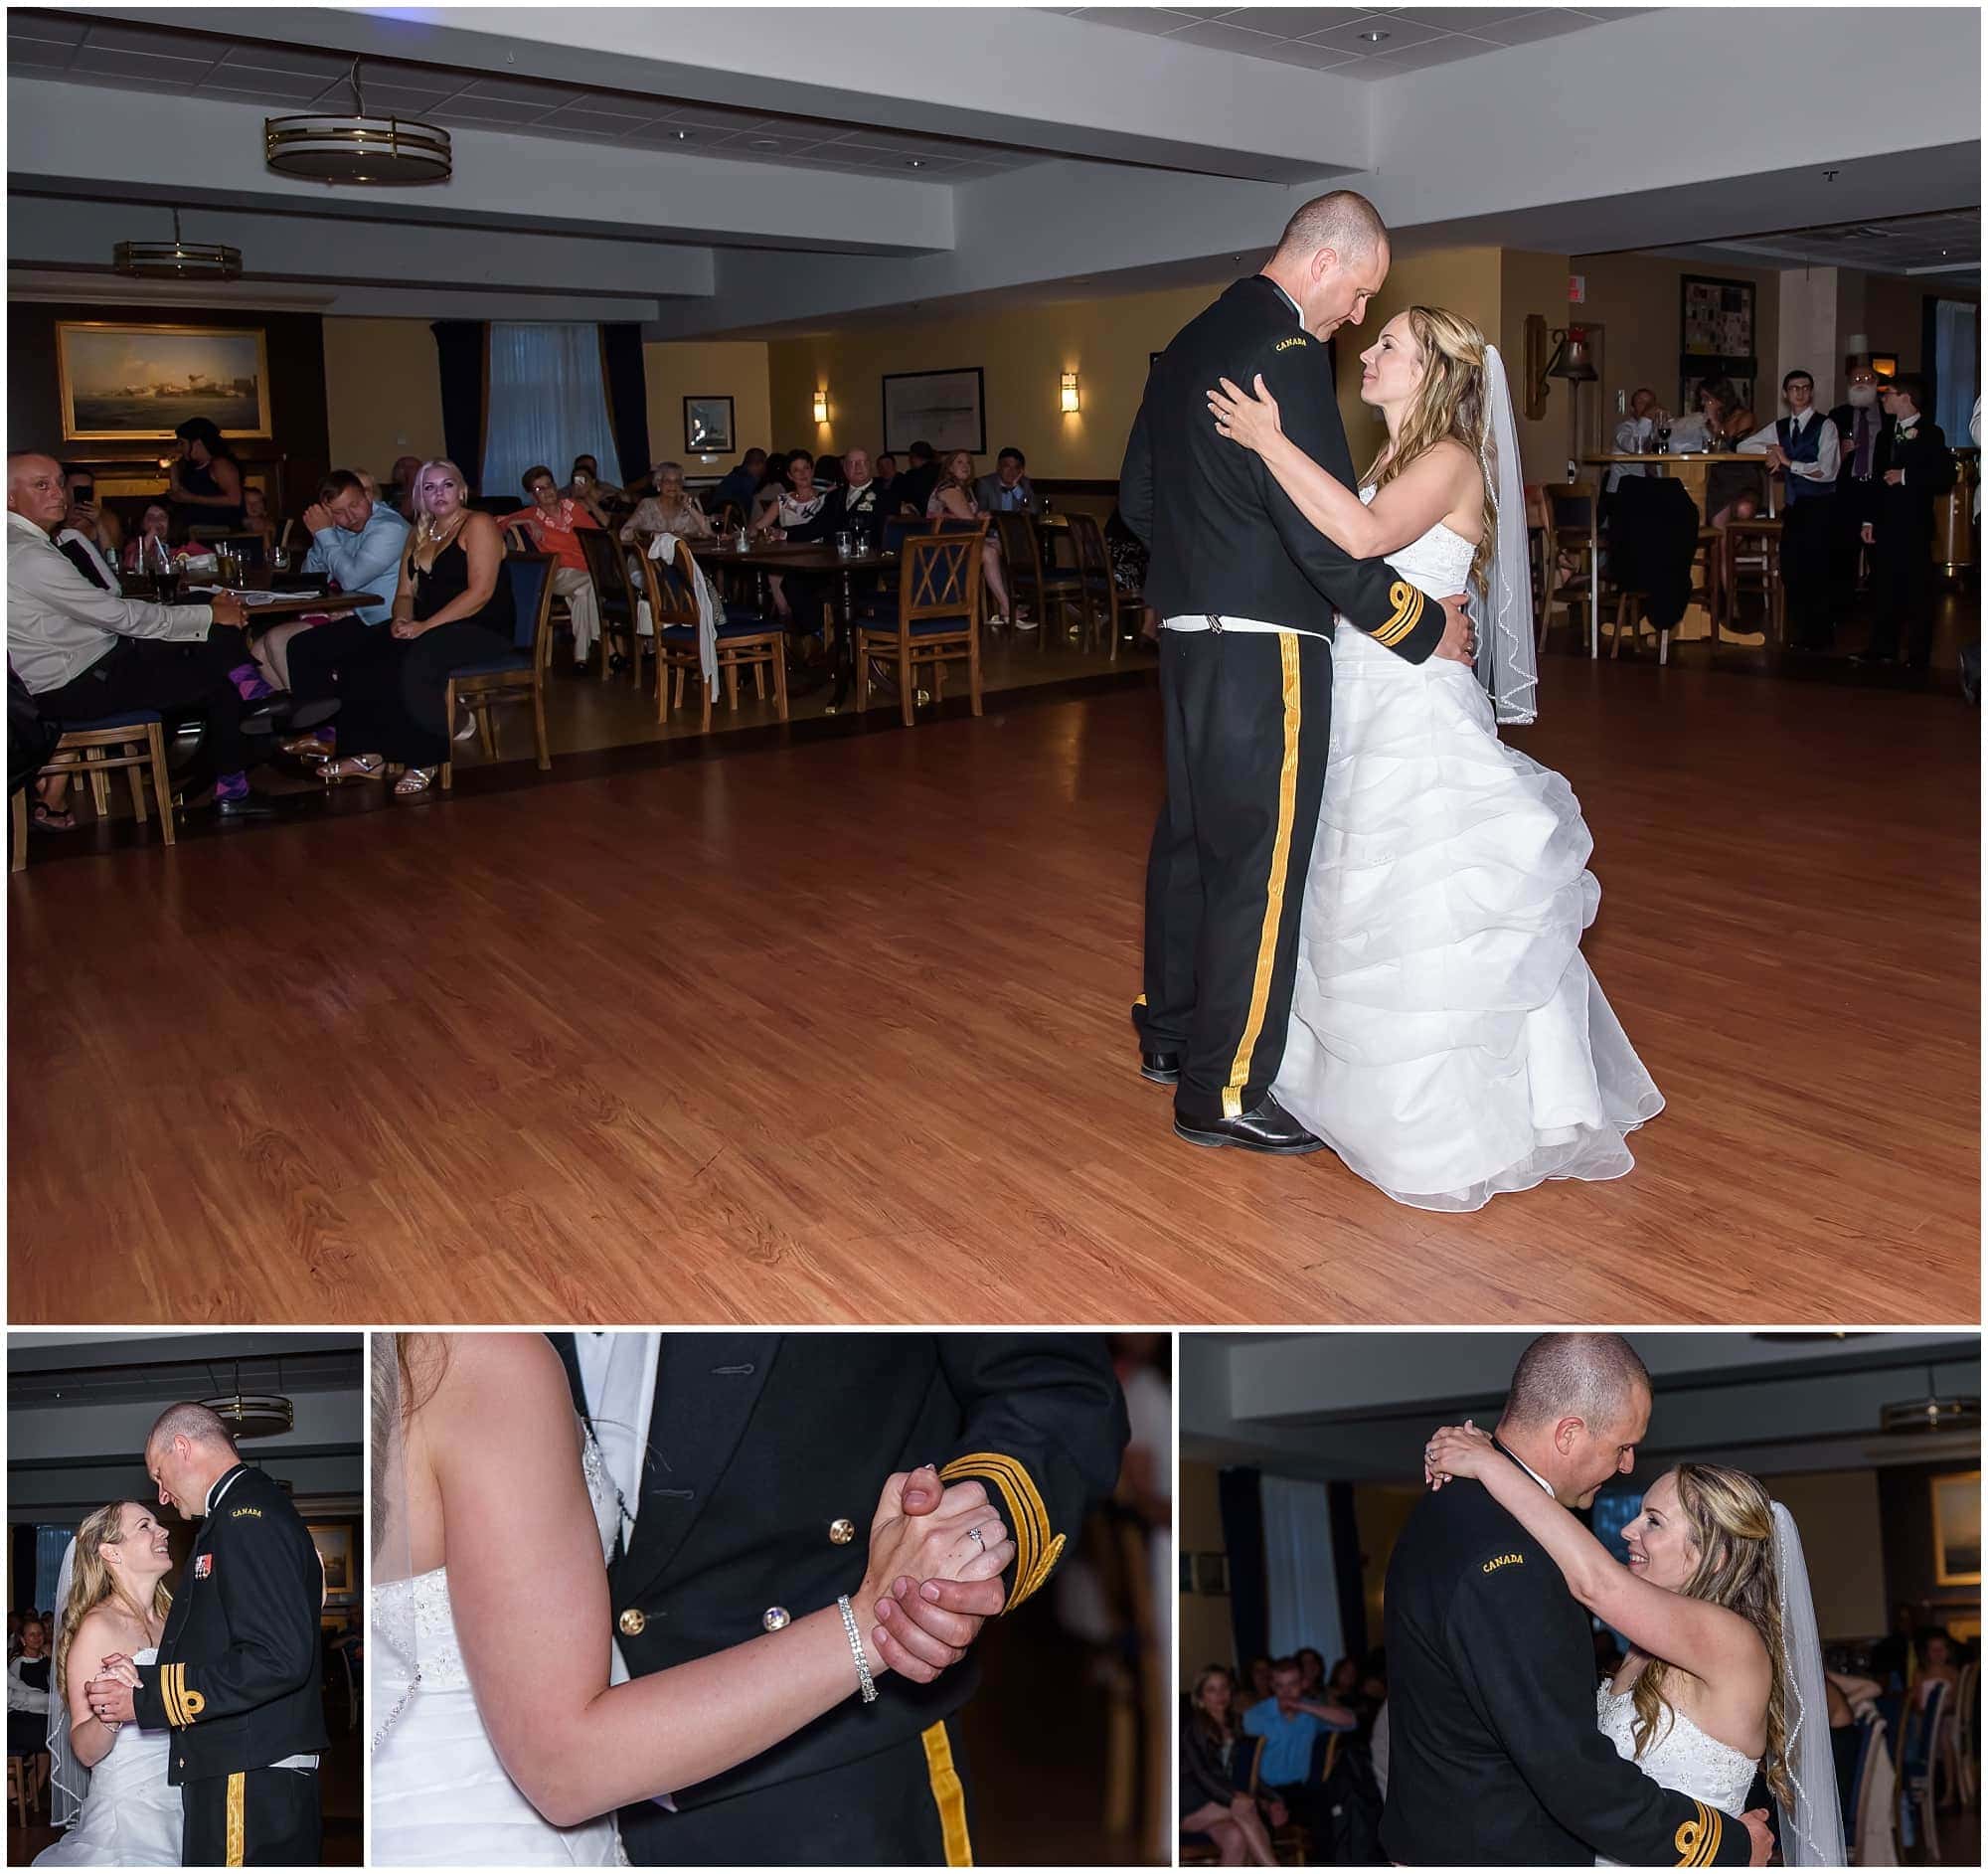 The bride and groom have their first wedding dance during their wedding reception at Juno Tower in Halifax, NS.